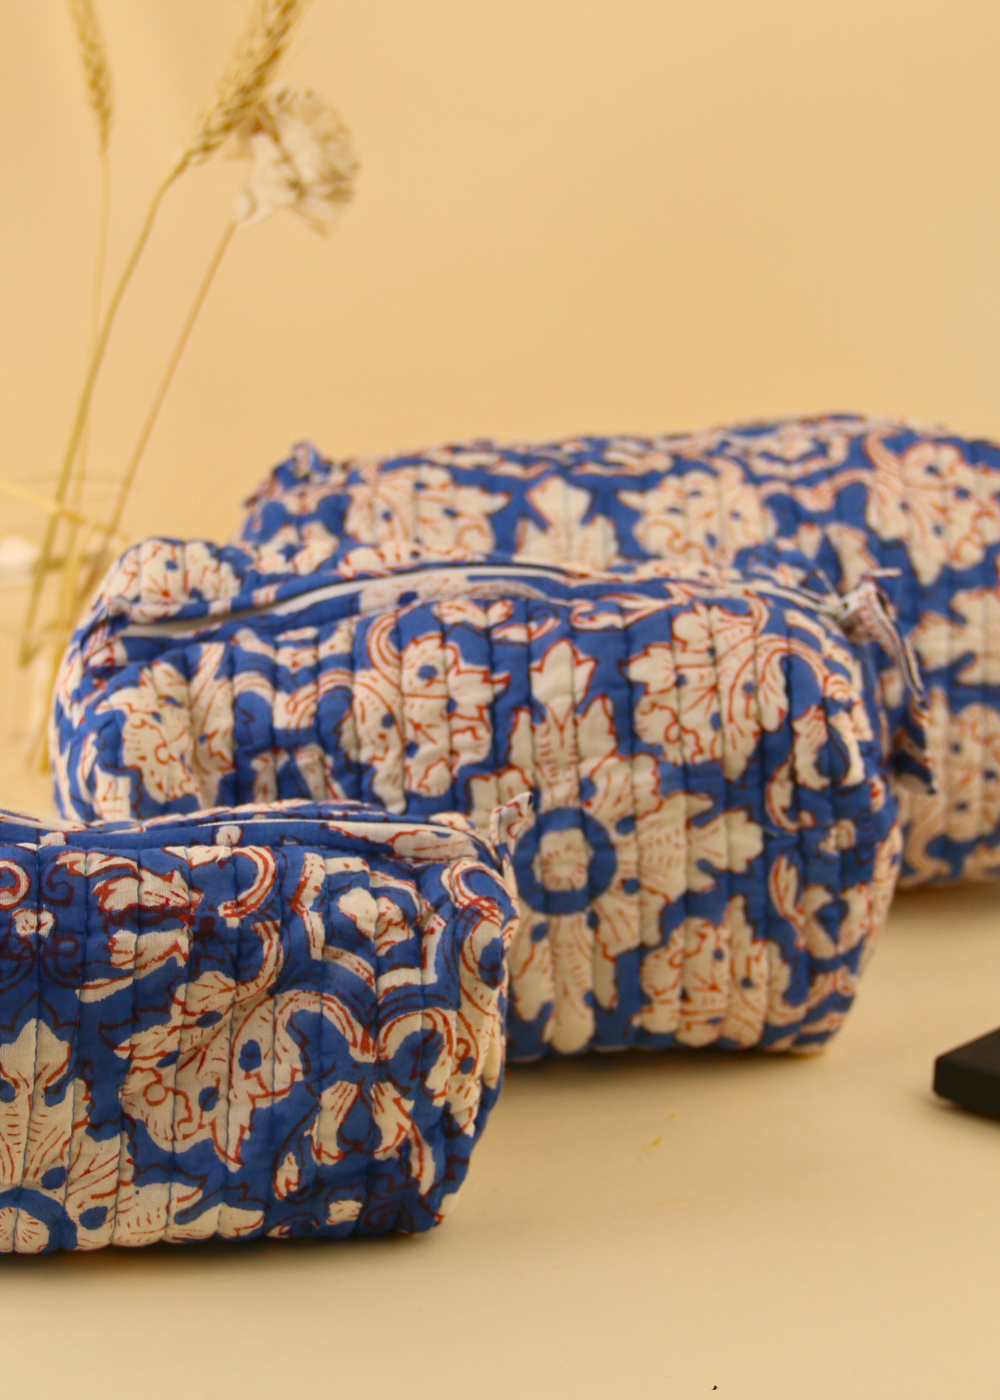 toiletry bags made by pure cotton